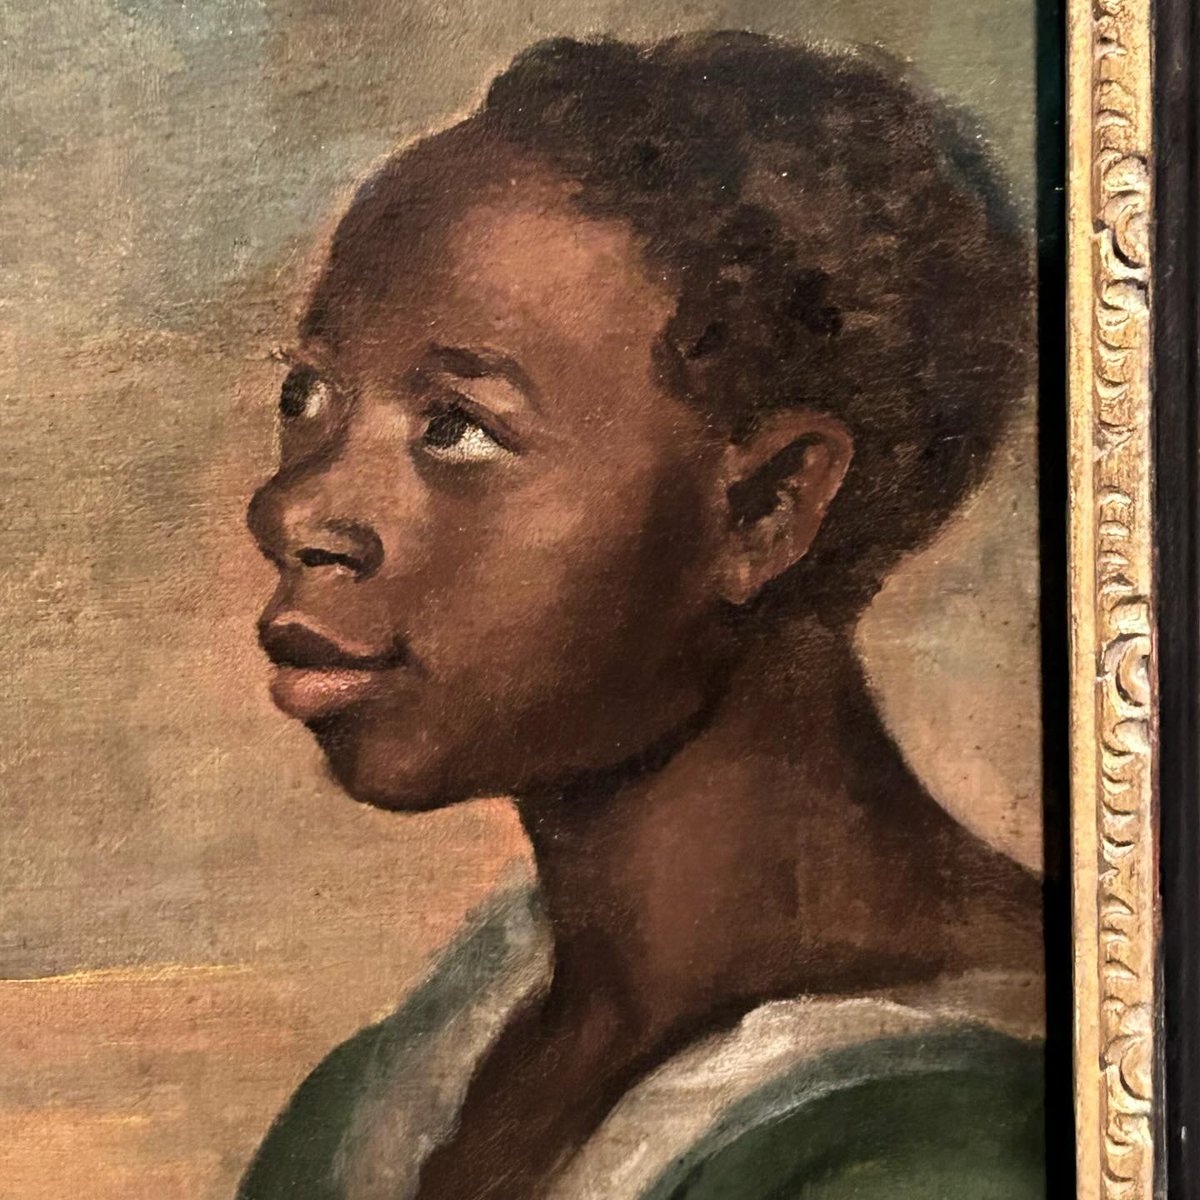 Colonial-era depictions of enslaved people from the Chesapeake are rare. This young woman’s name is not recorded, but she may have served as a nursemaid to Gustavus Hesselius, Jr. (1765-1767).

#VastEarlyAmerica
#AmericanArt